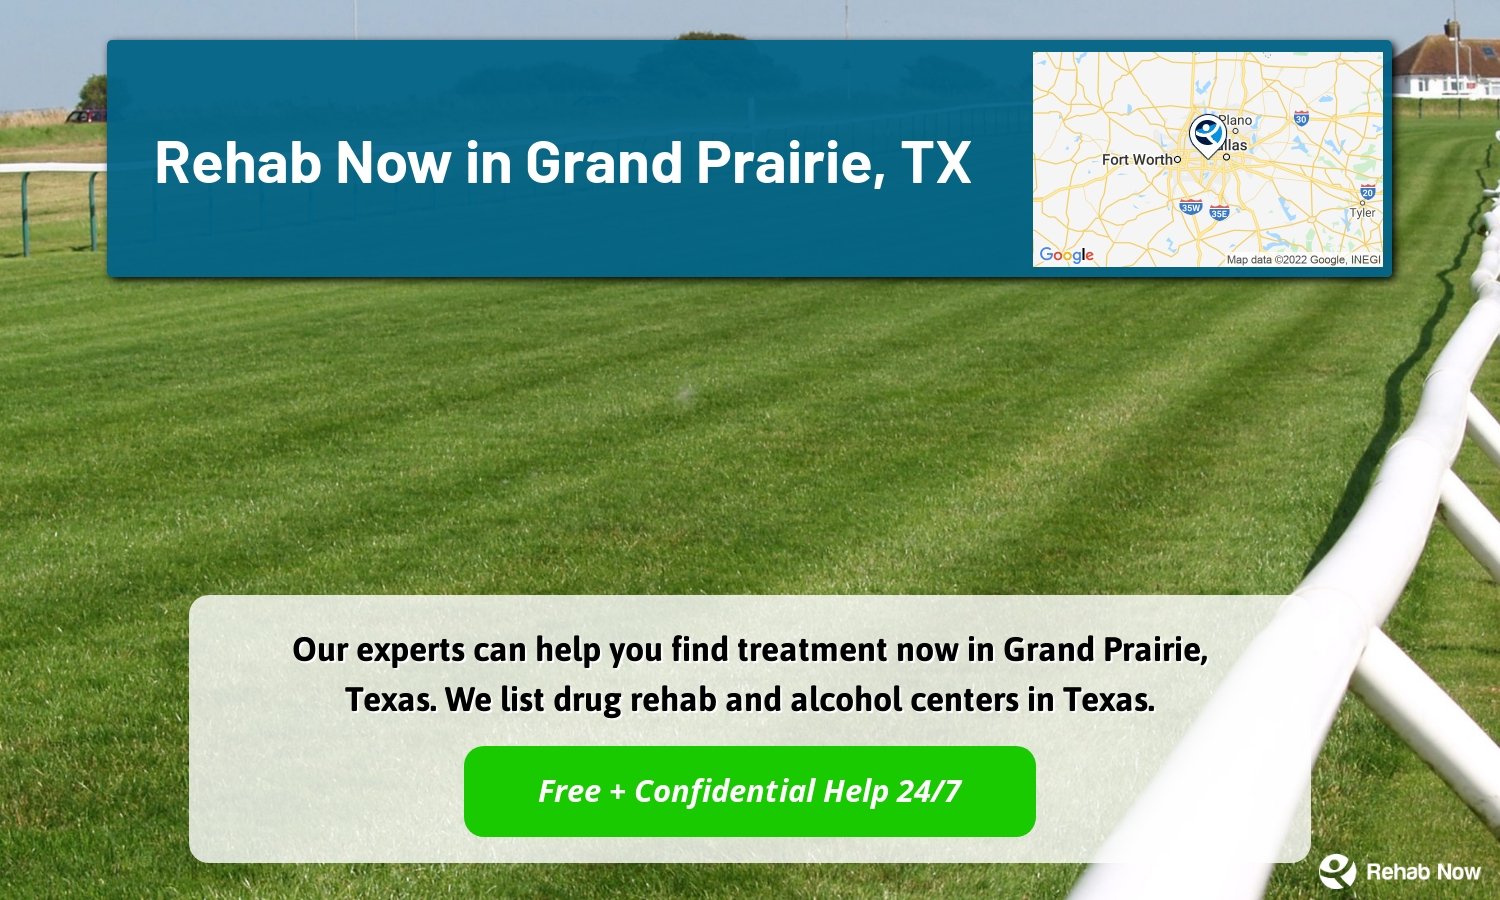 Our experts can help you find treatment now in Grand Prairie, Texas. We list drug rehab and alcohol centers in Texas.